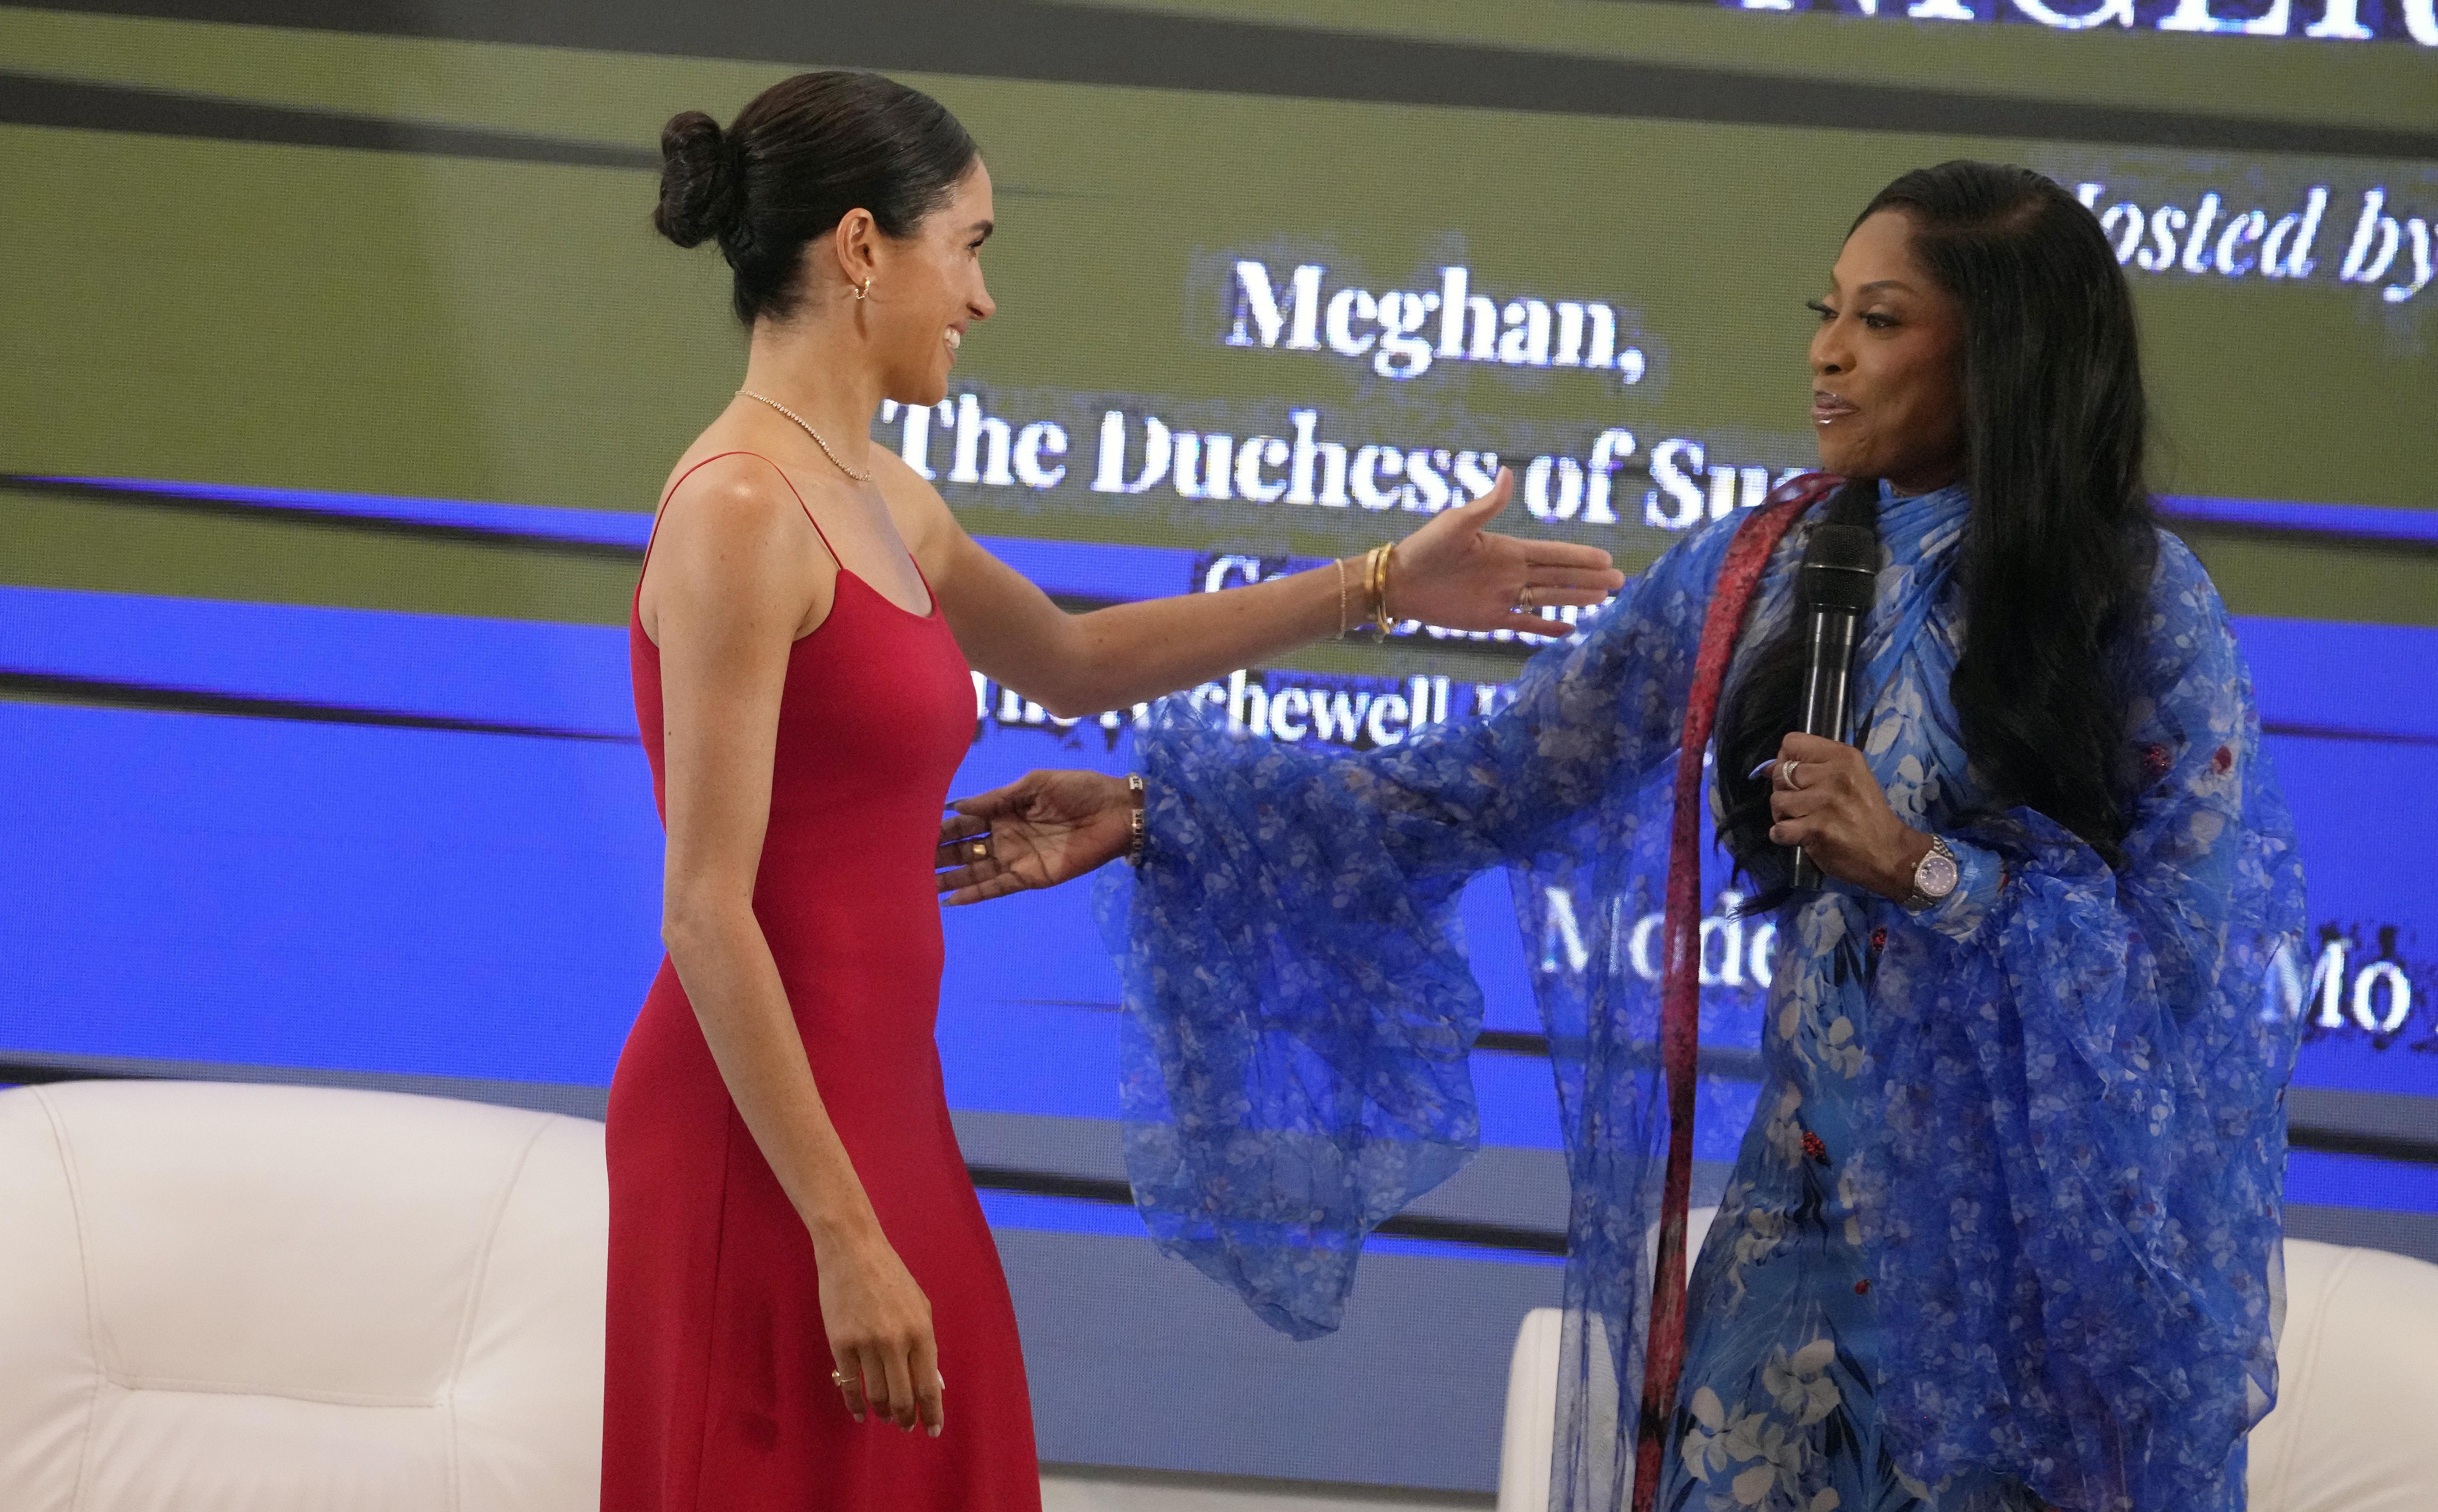 Judi says that Meghan has also been showcasing a more formal body language